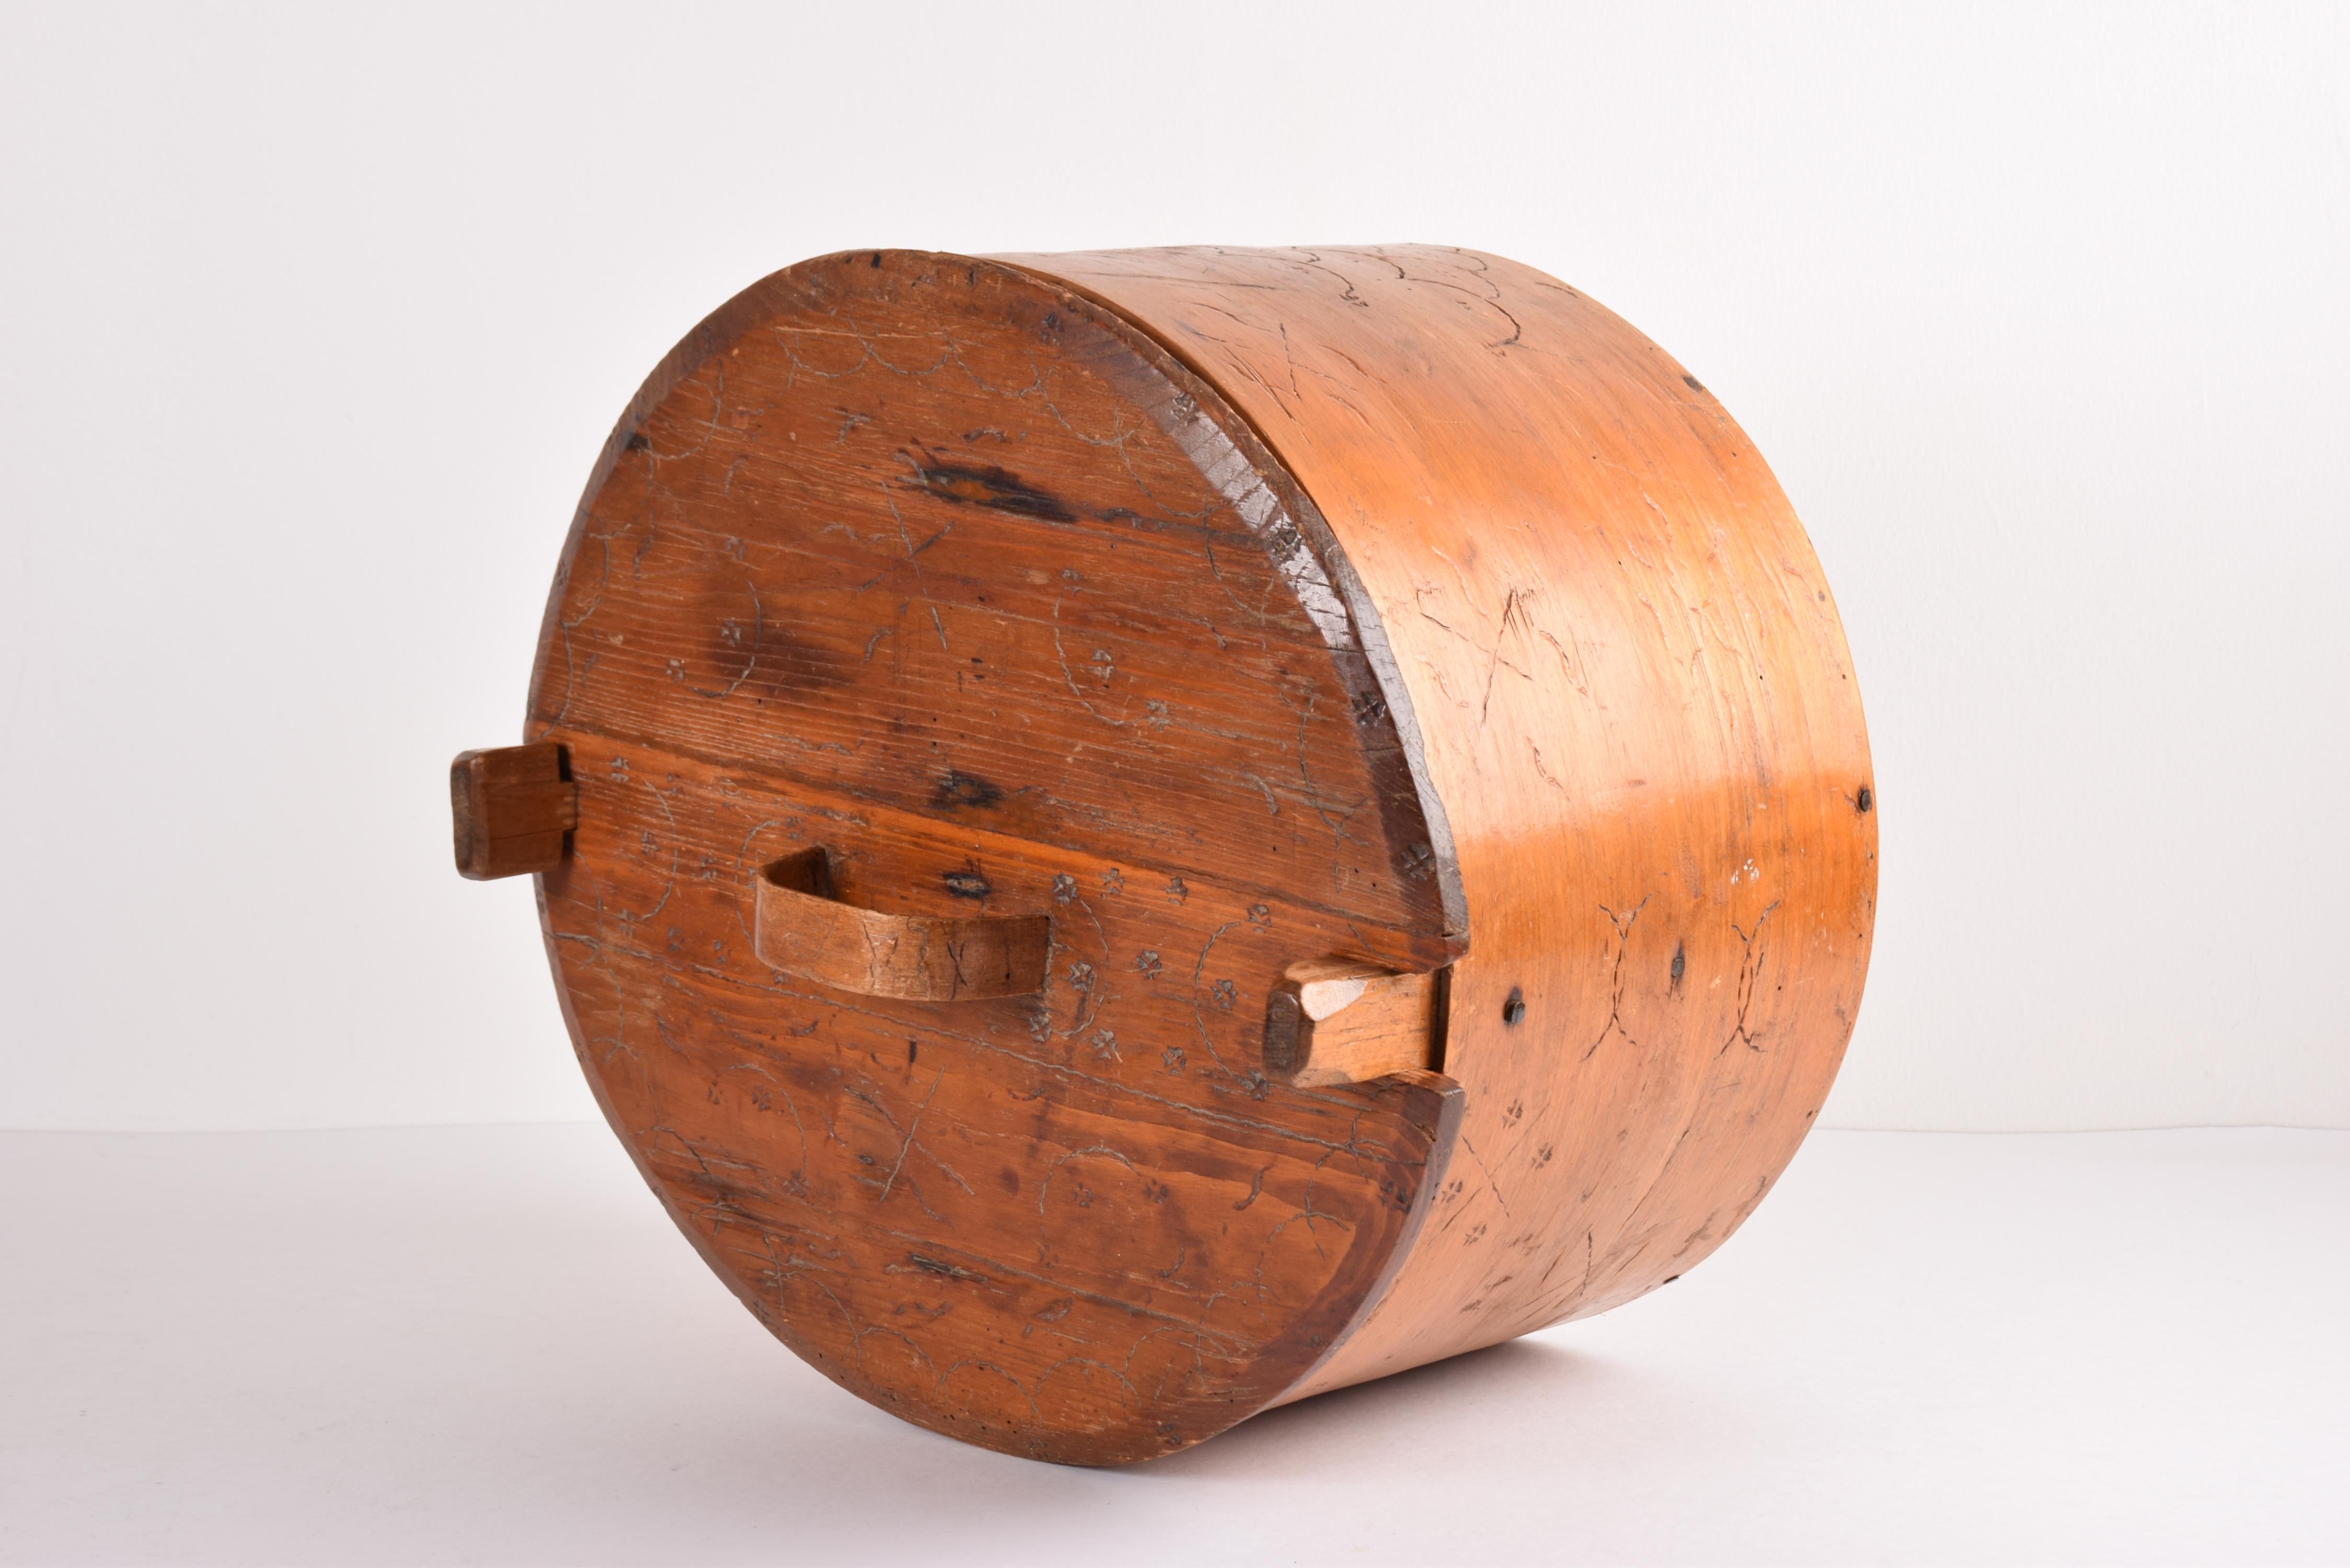 Antique Scandinavian Round Storage Box “Tejne” Decorated Pine, Late 19th Century In Fair Condition For Sale In Aarhus C, DK